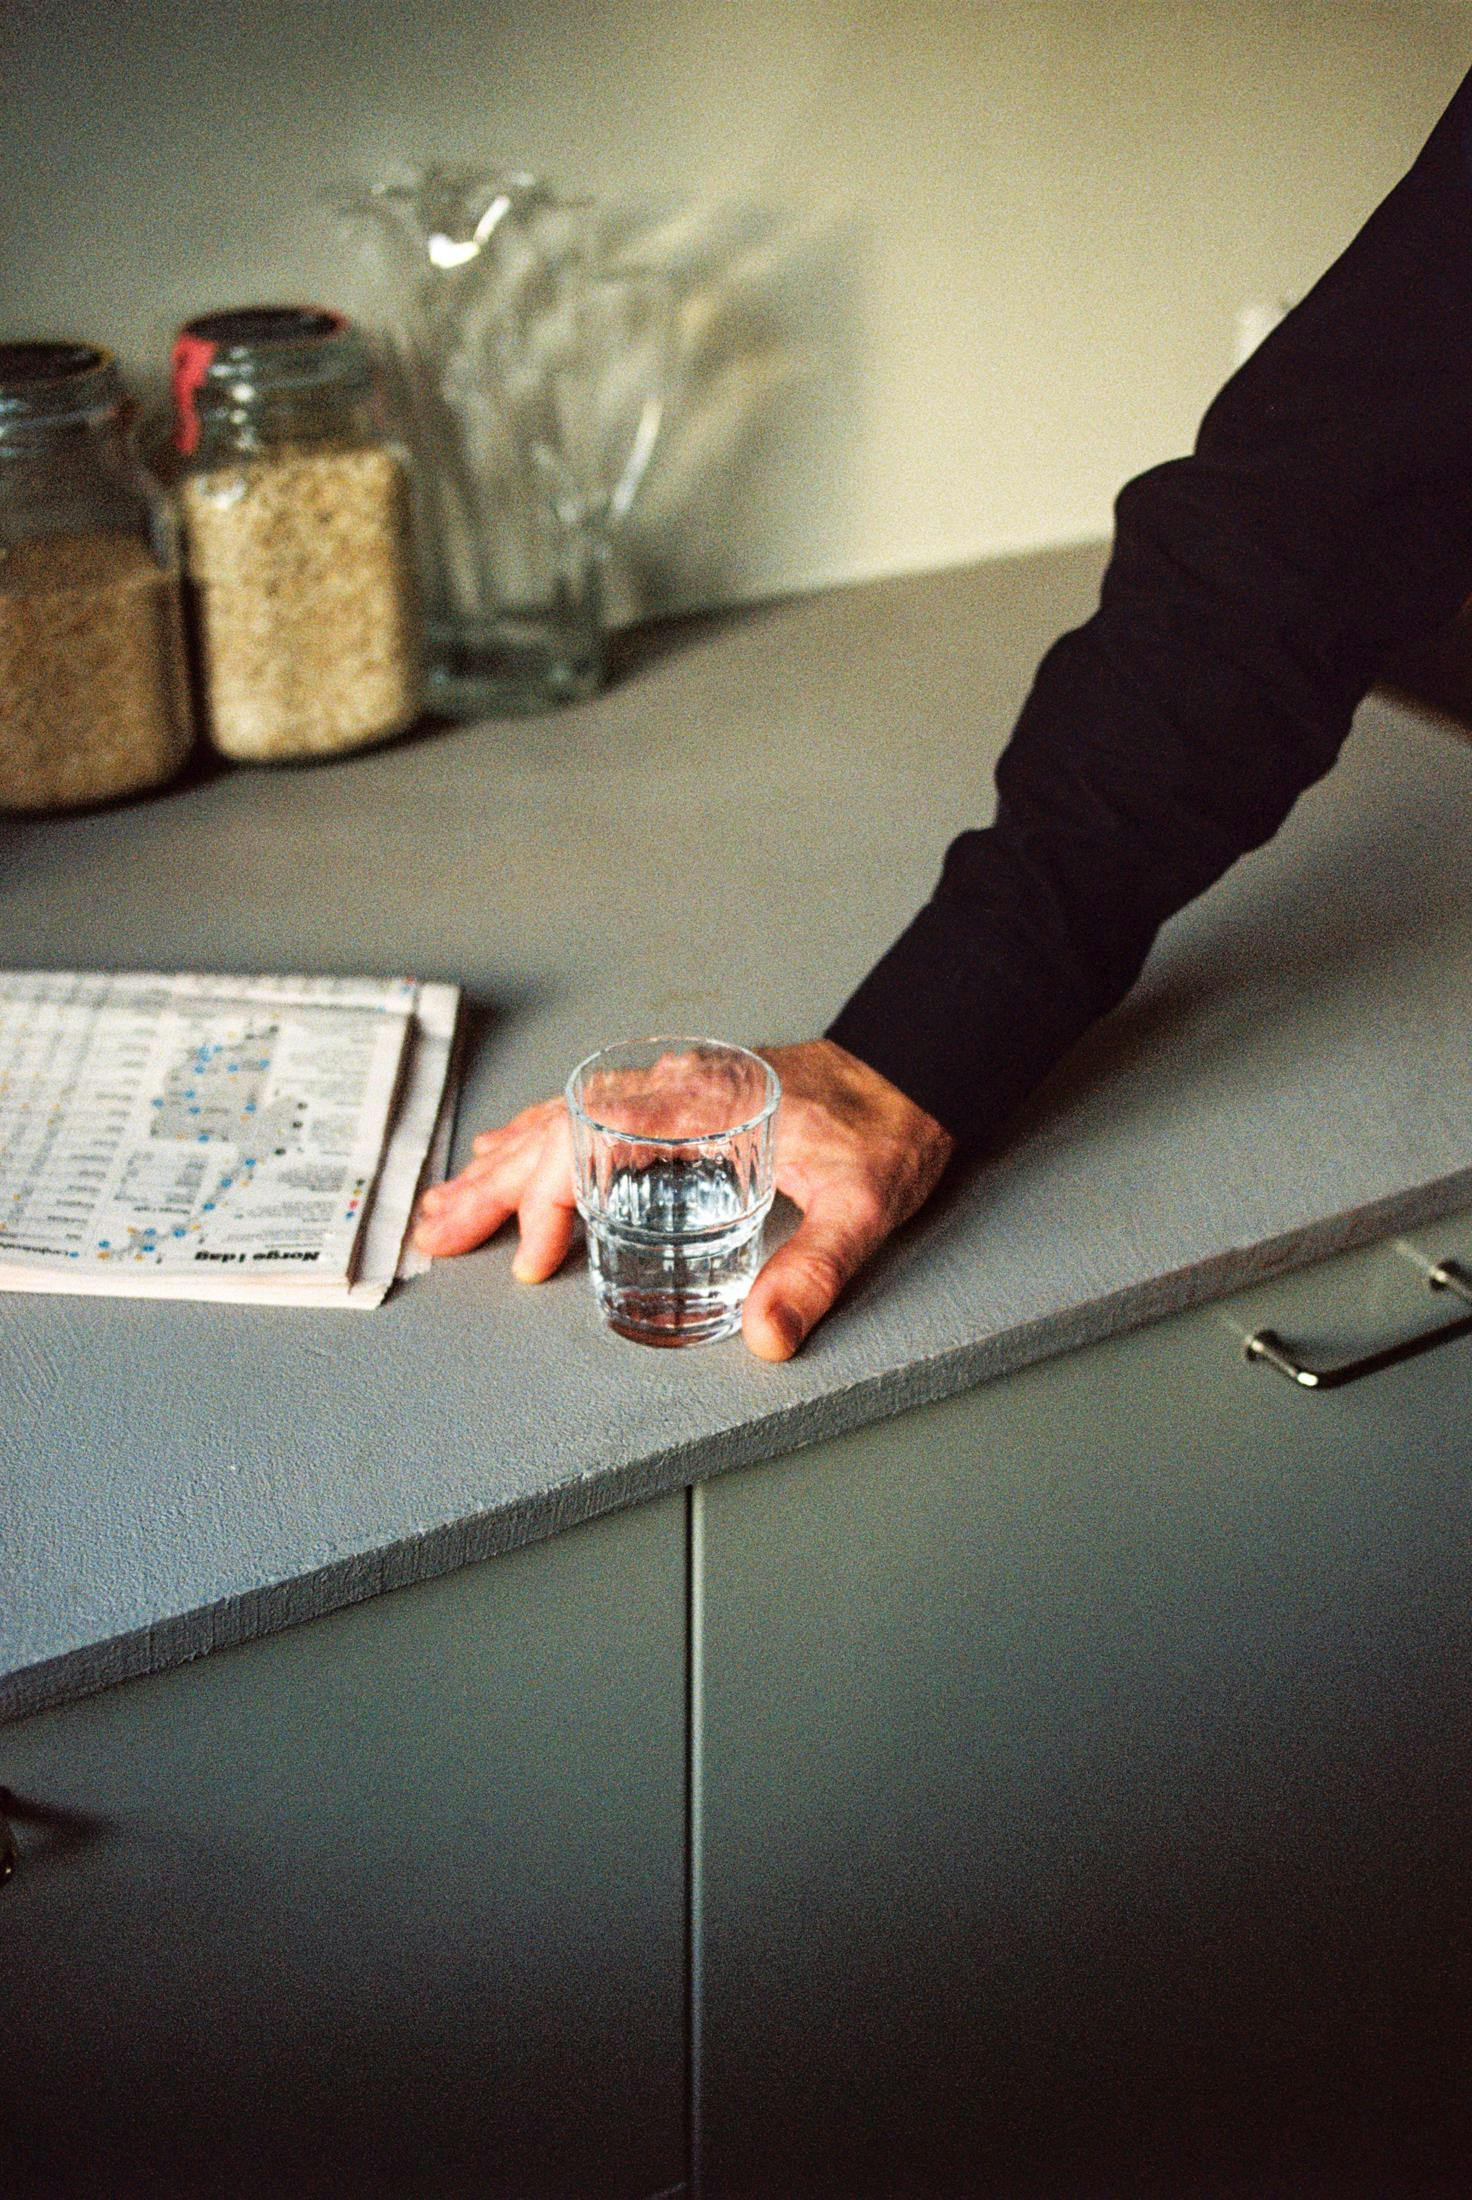 An image of a man holding a glass of water on a kitchen countertop